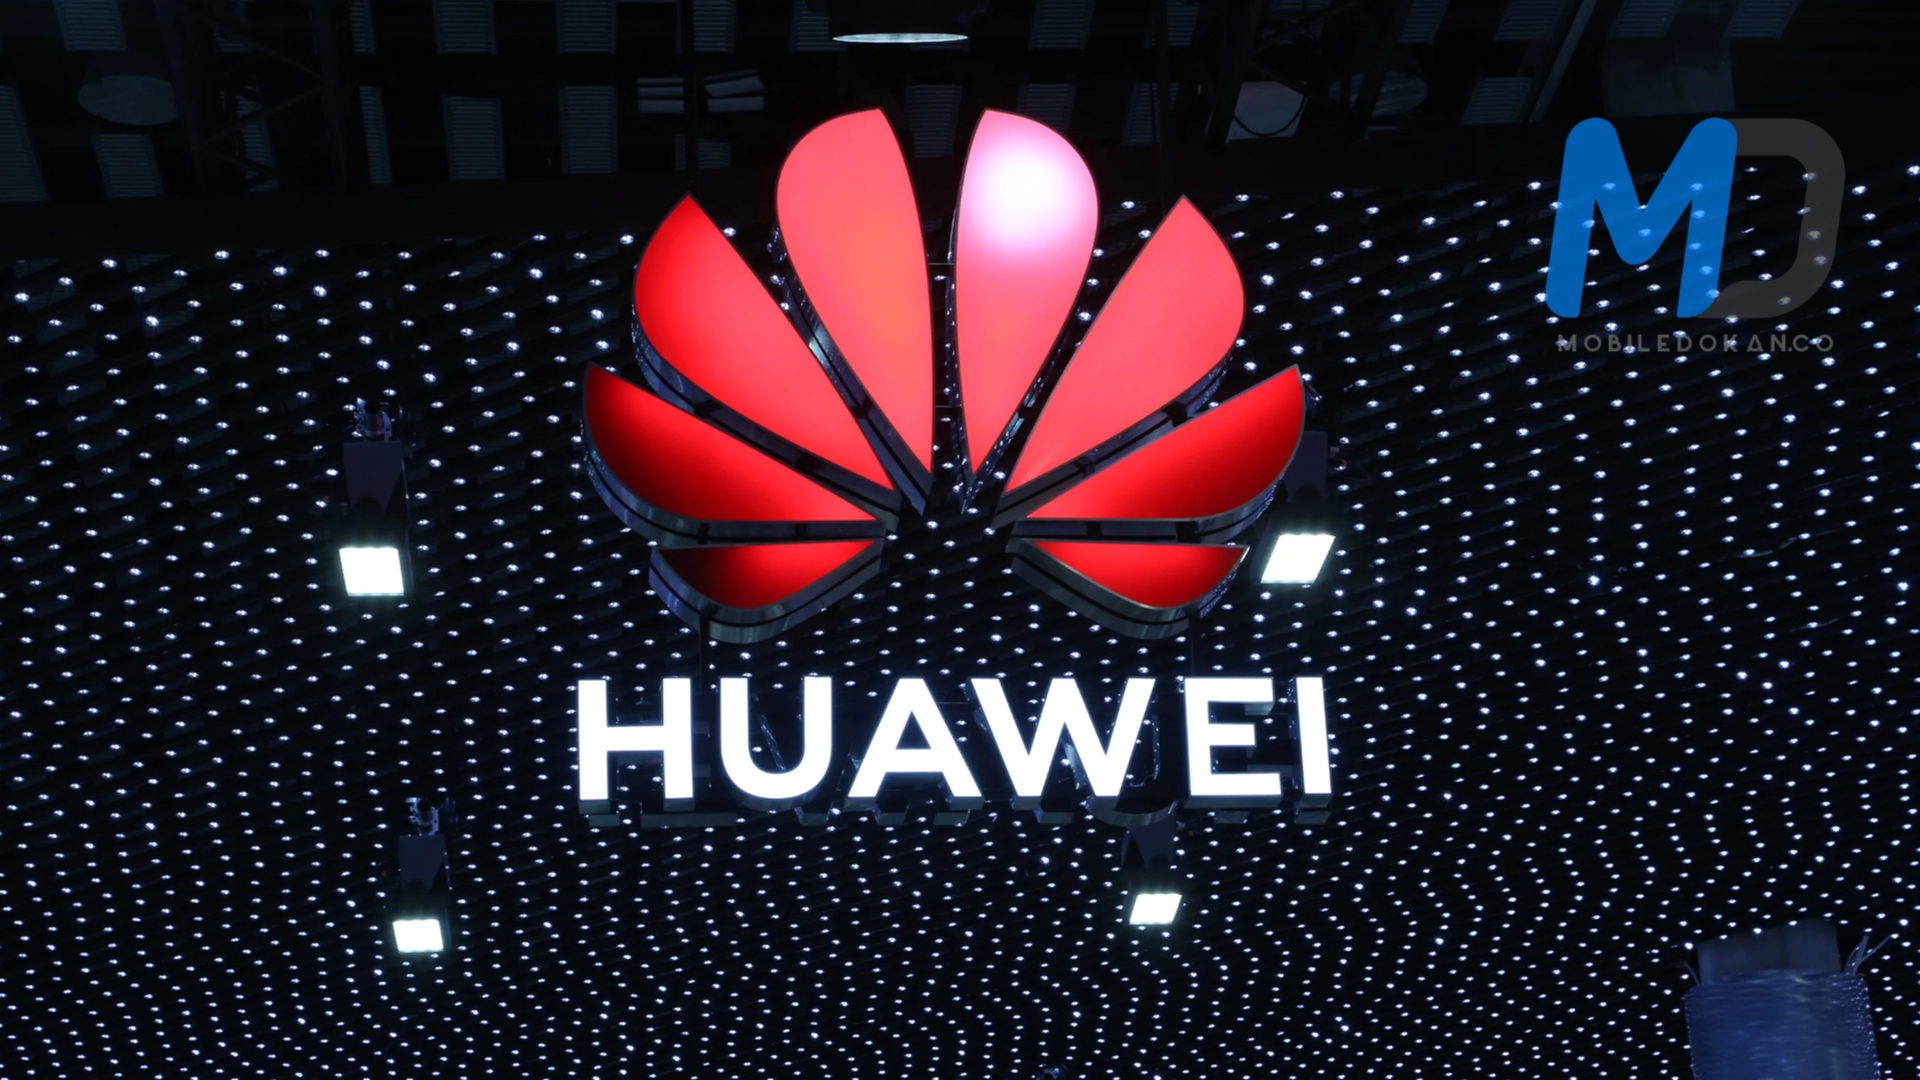 Huawei shifts focus to emerging markets due to uncertain prospects